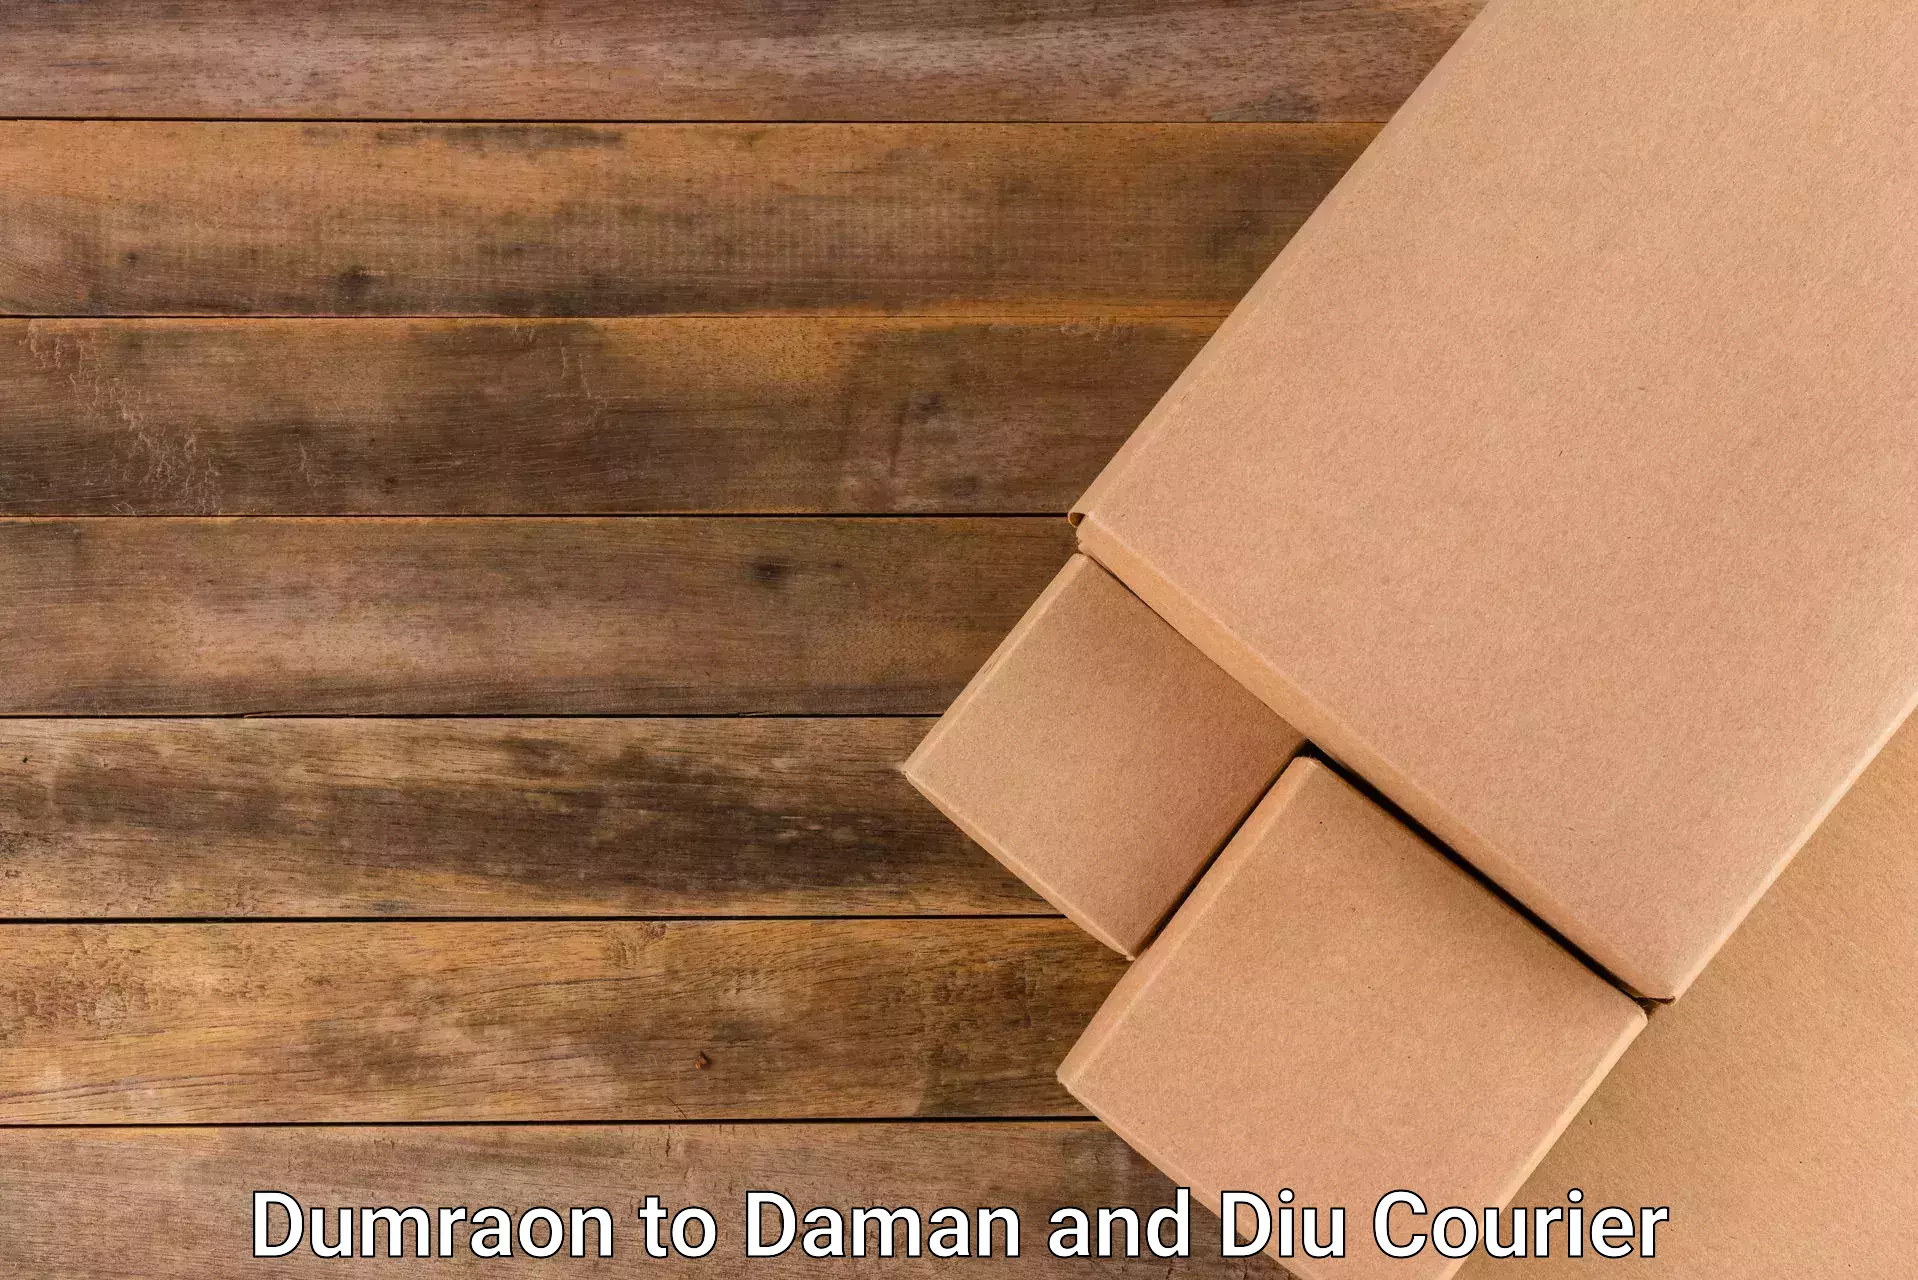 Business courier solutions Dumraon to Diu